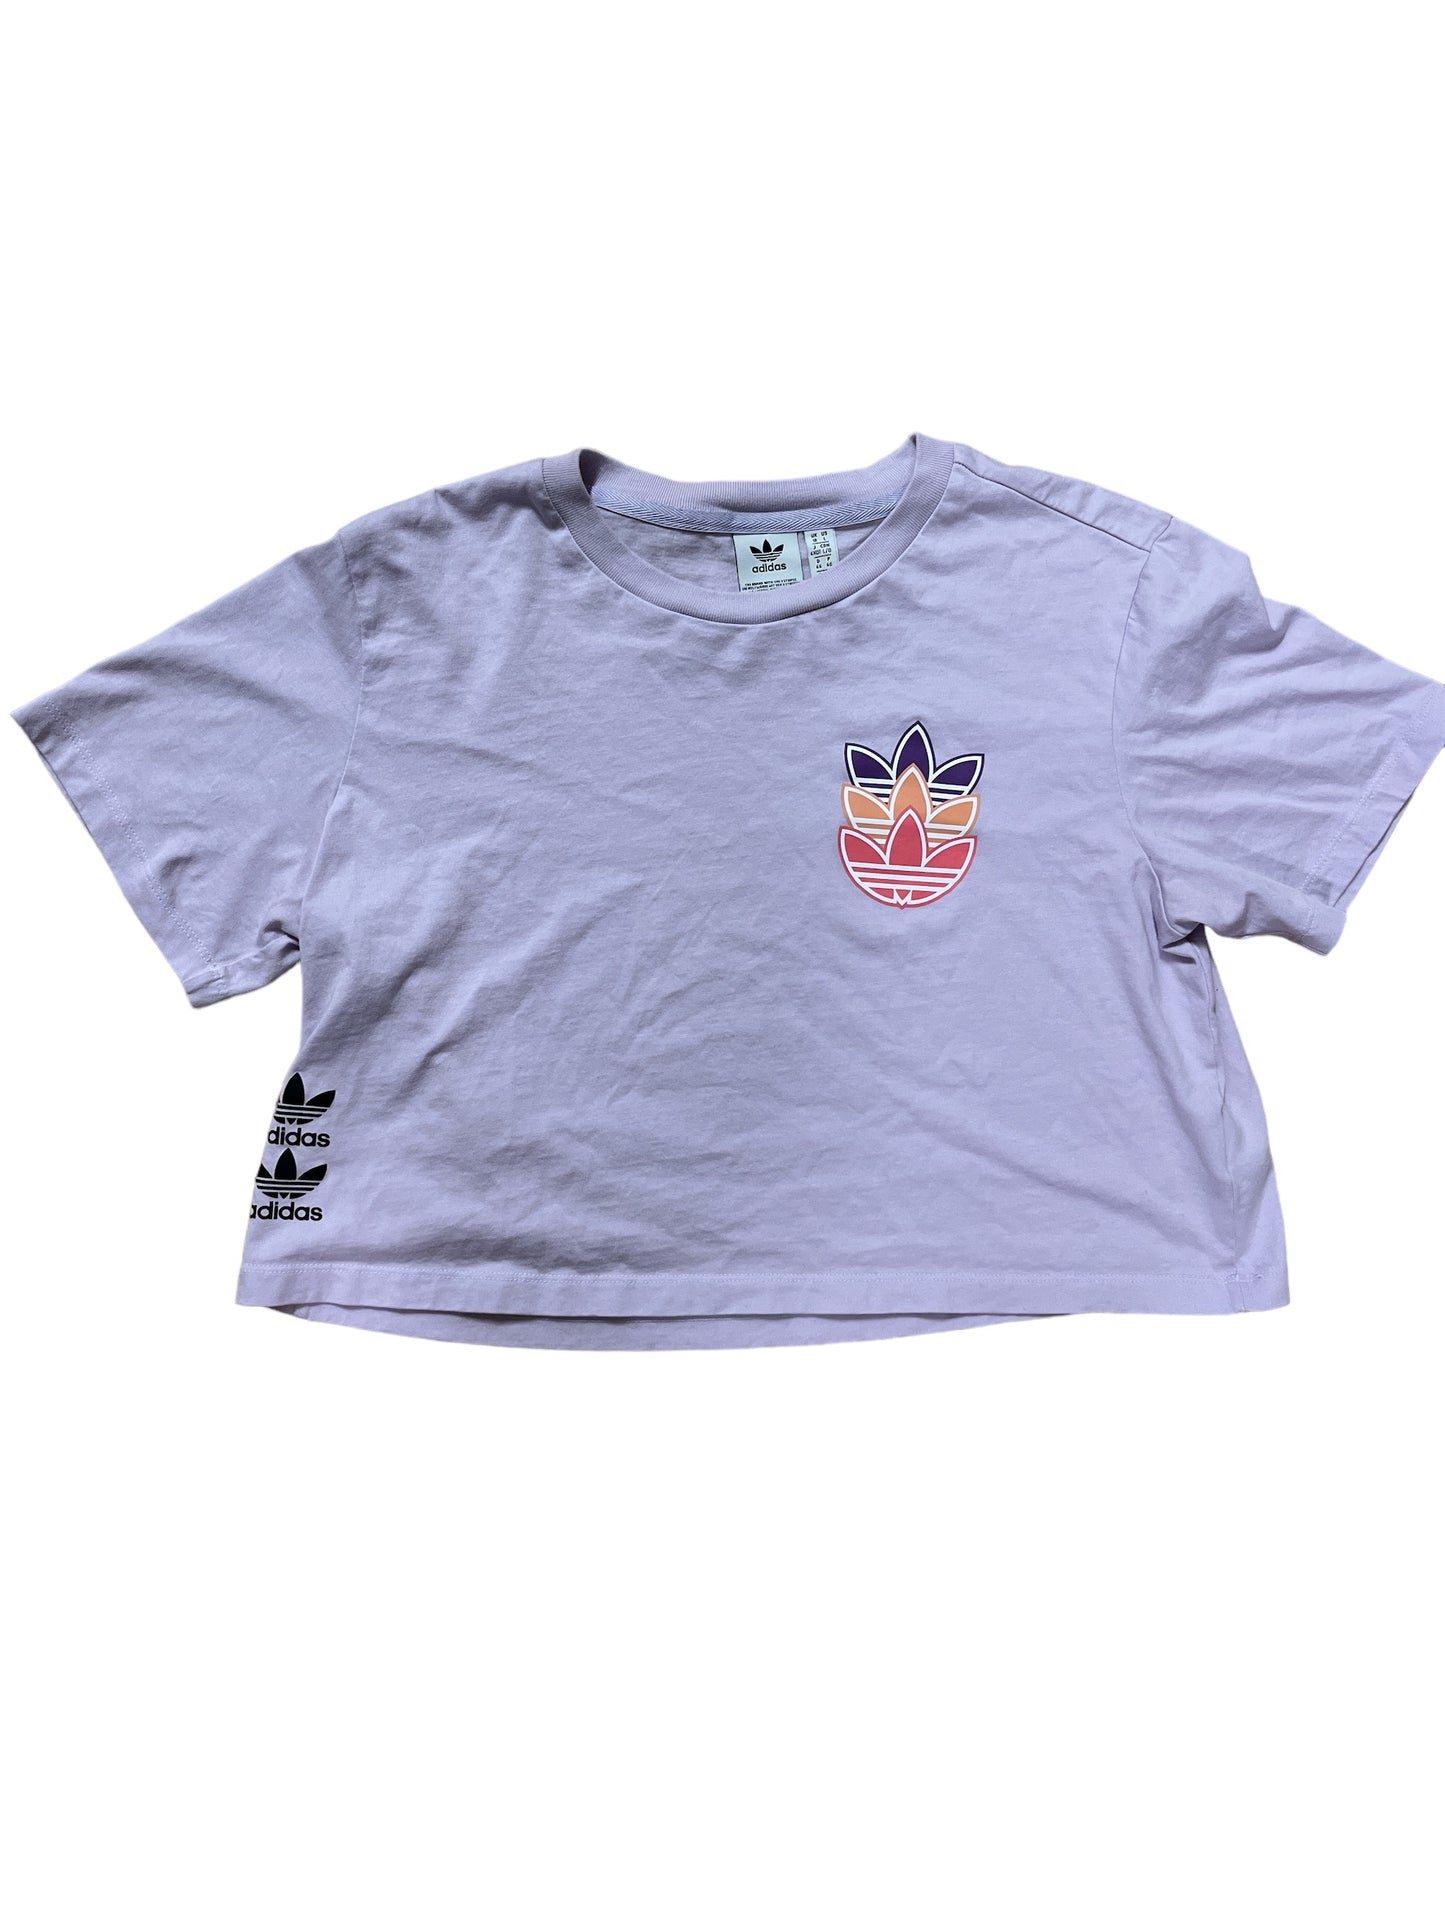 Adidas Cropped Tee - Lilac (L)